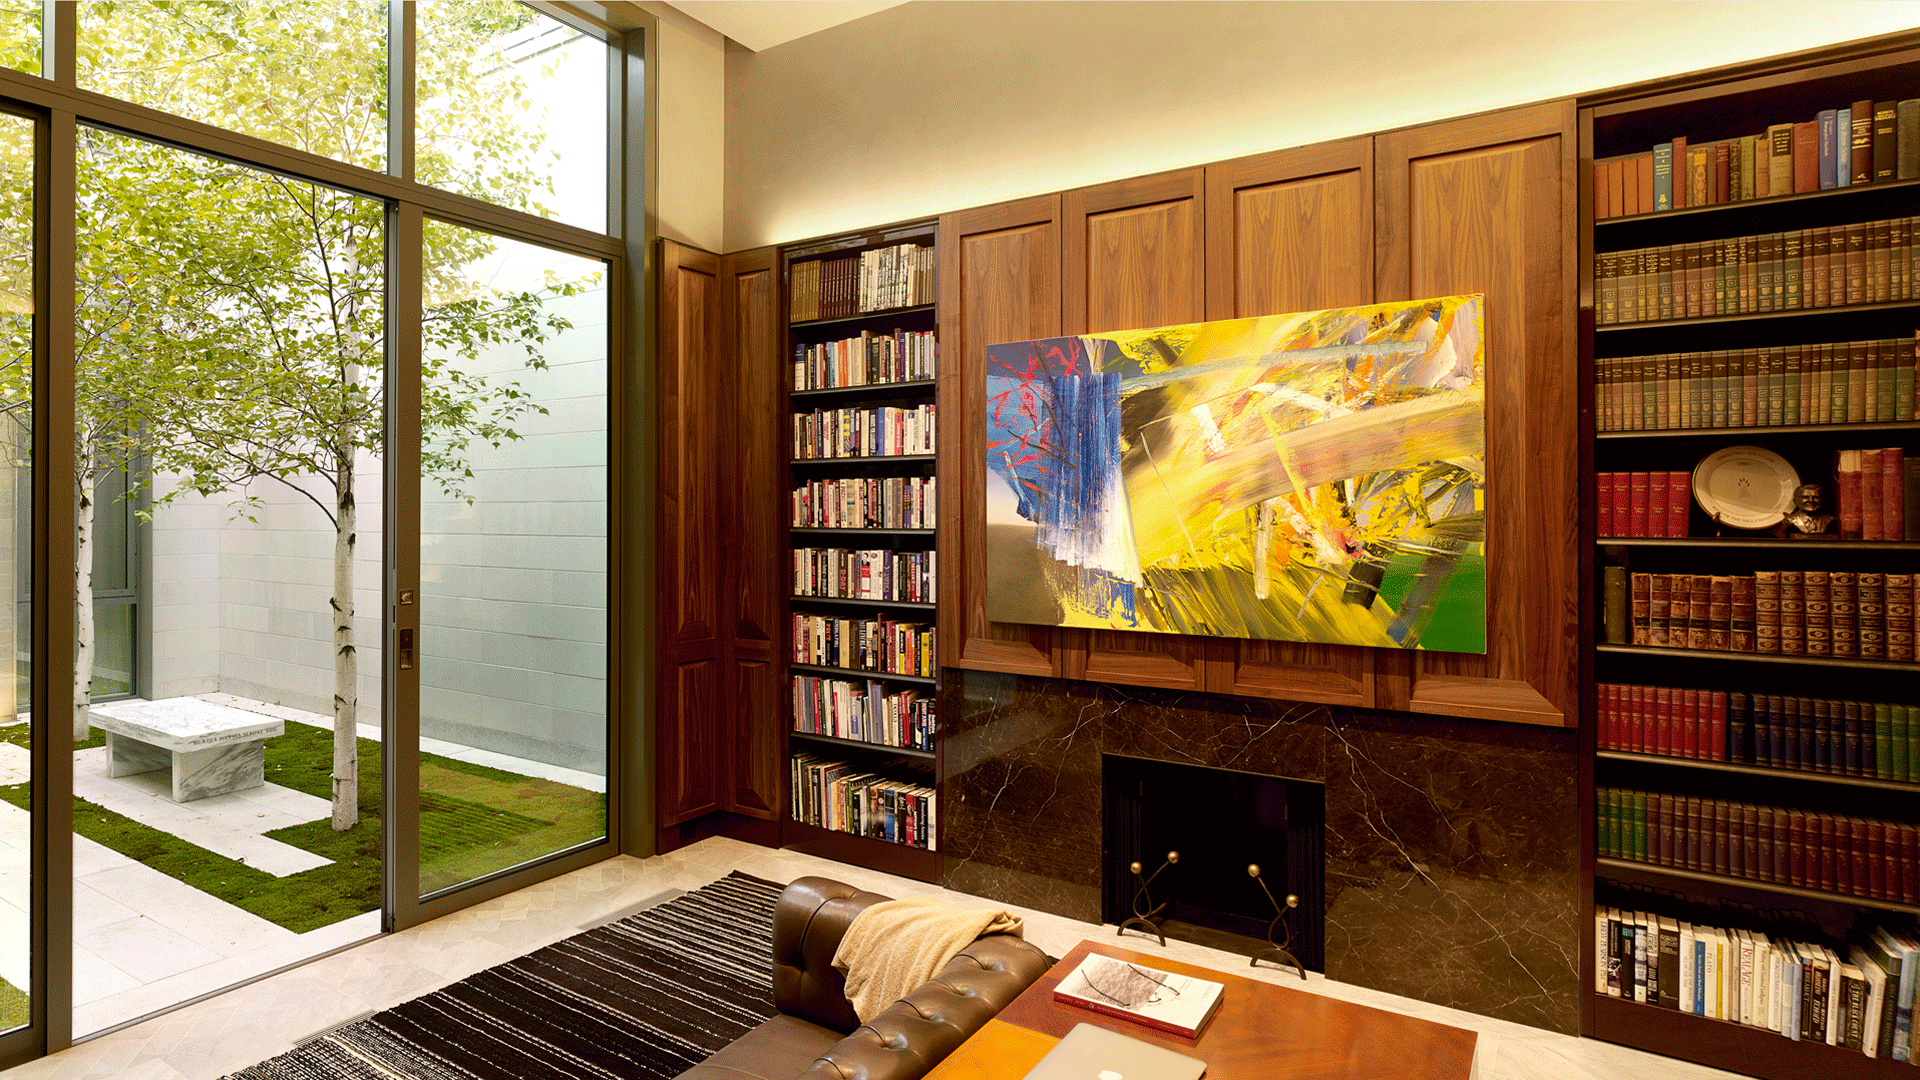 operable bookcases flank a fireplace and painting